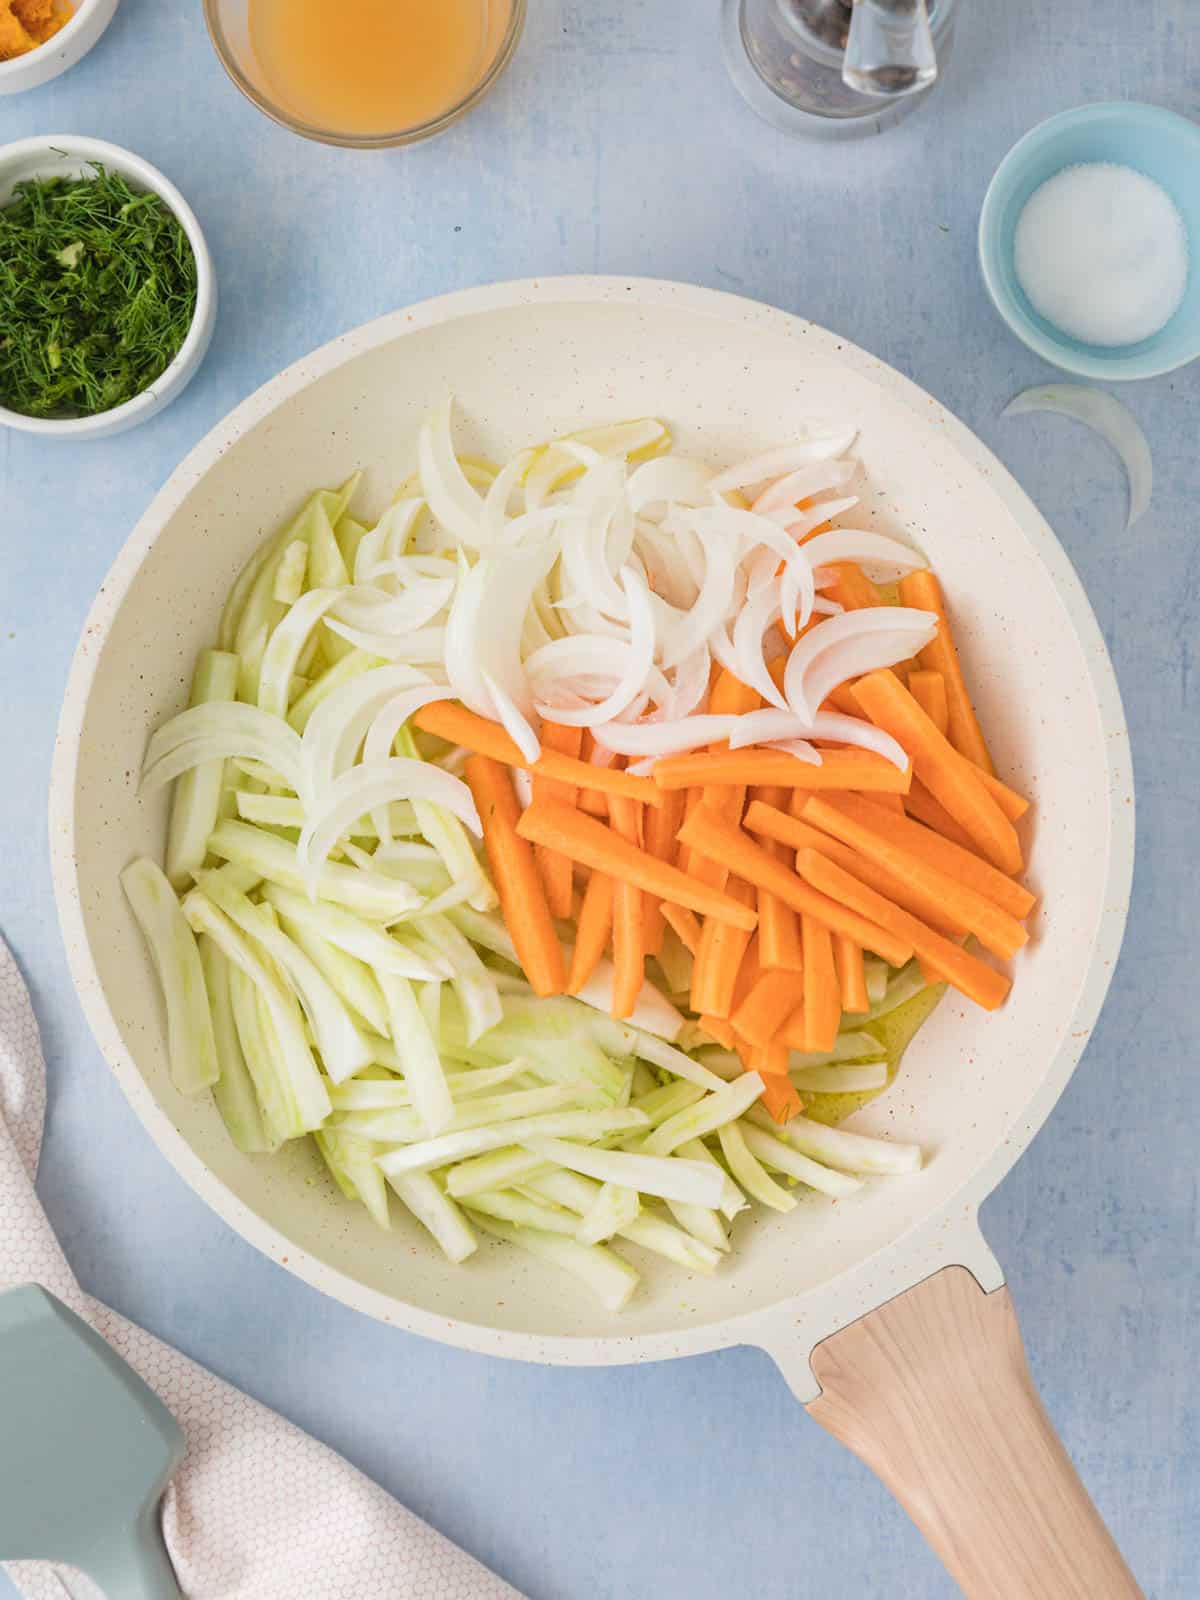 Sliced onion, fennel, and carrot in a pan ready for cooking.